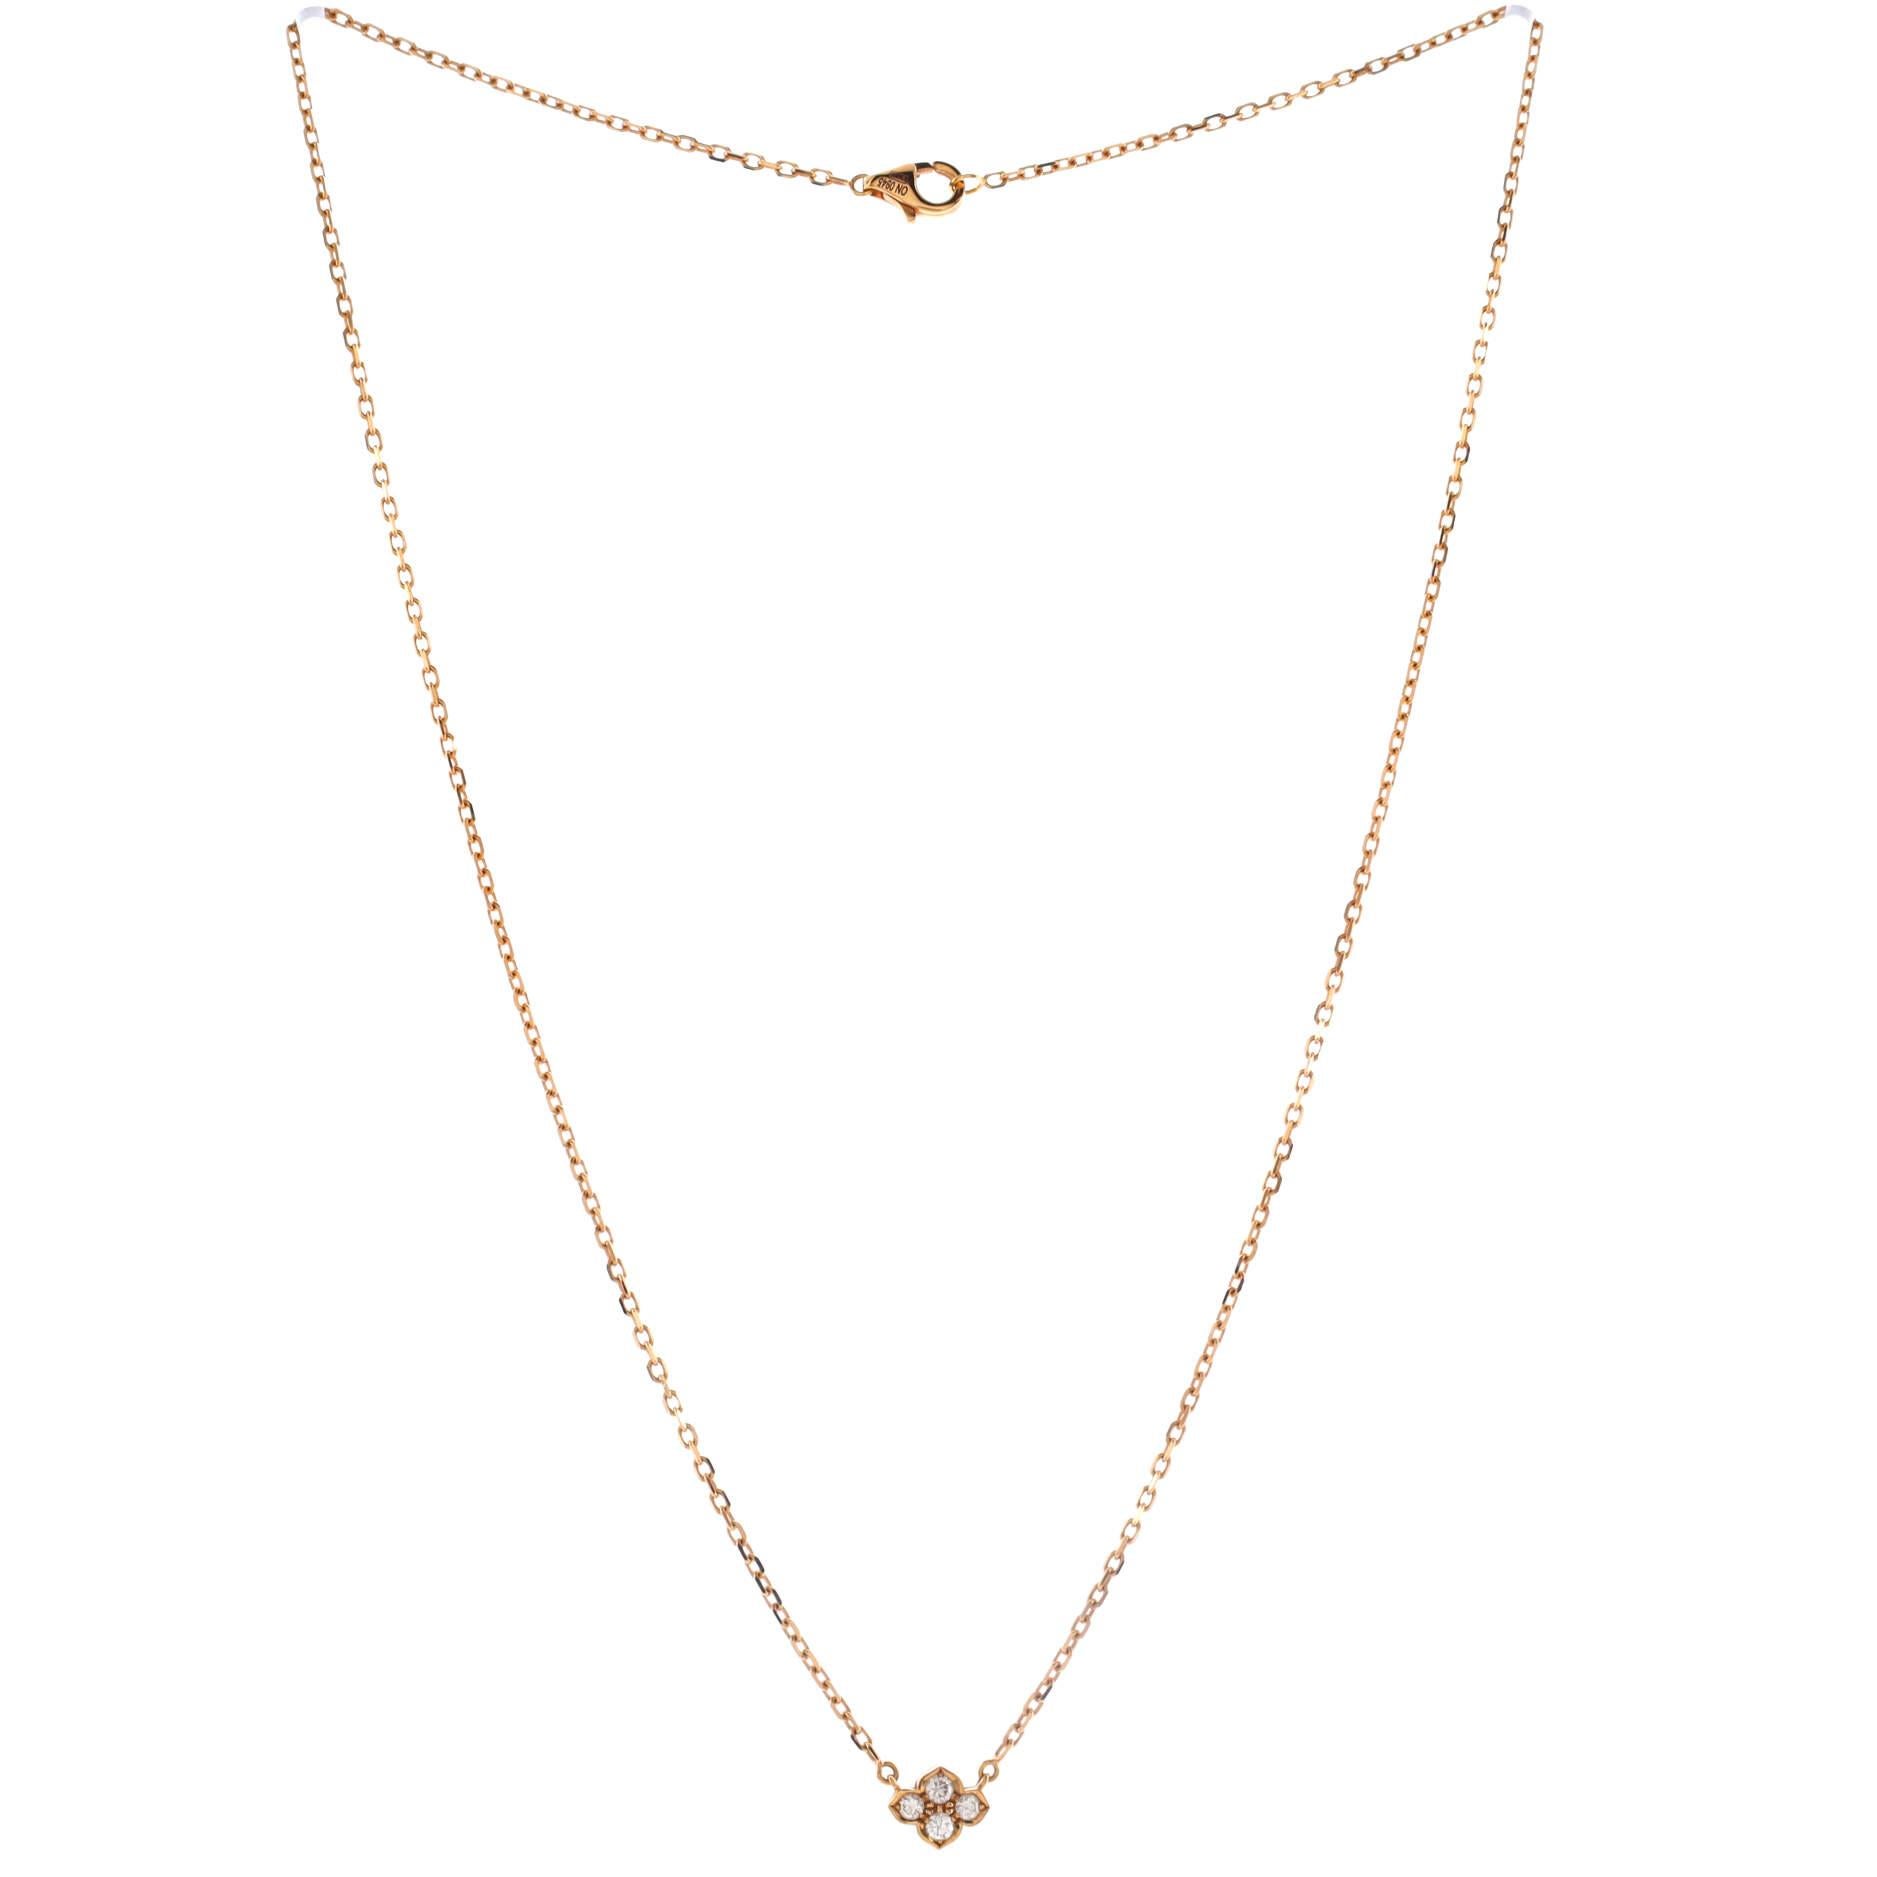 Condition: Great. Minor wear throughout.
Accessories: No Accessories
Measurements: Pendant Length: 6.65 mm, Pendant Width: 8.30 mm
Designer: Cartier
Model: Hindu Pendant Necklace 18K Rose Gold and Diamonds
Exterior Color: Rose Gold
Item Number: